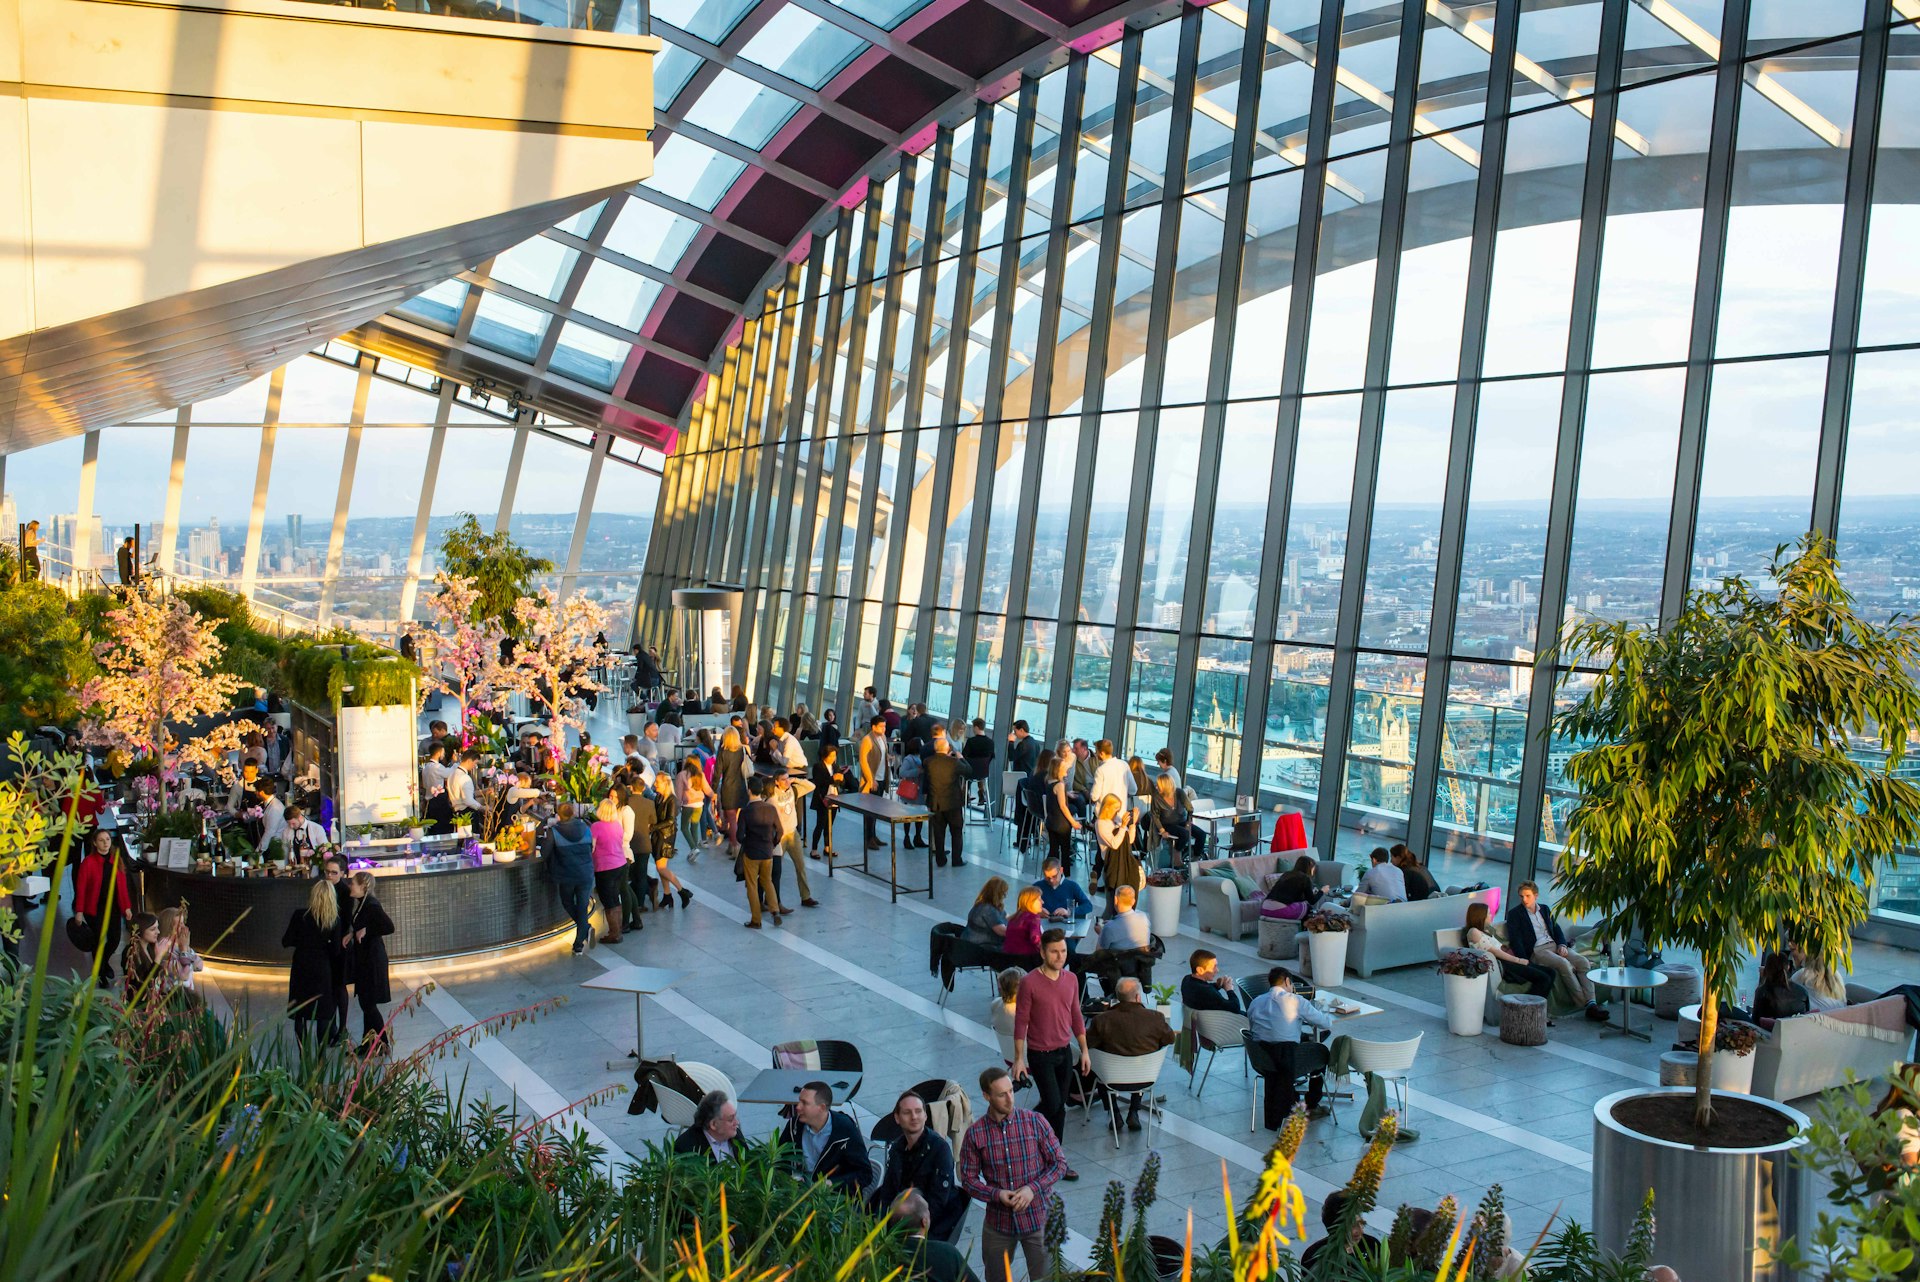 People mill around inside the Sky Garden among the plants, looking at the view